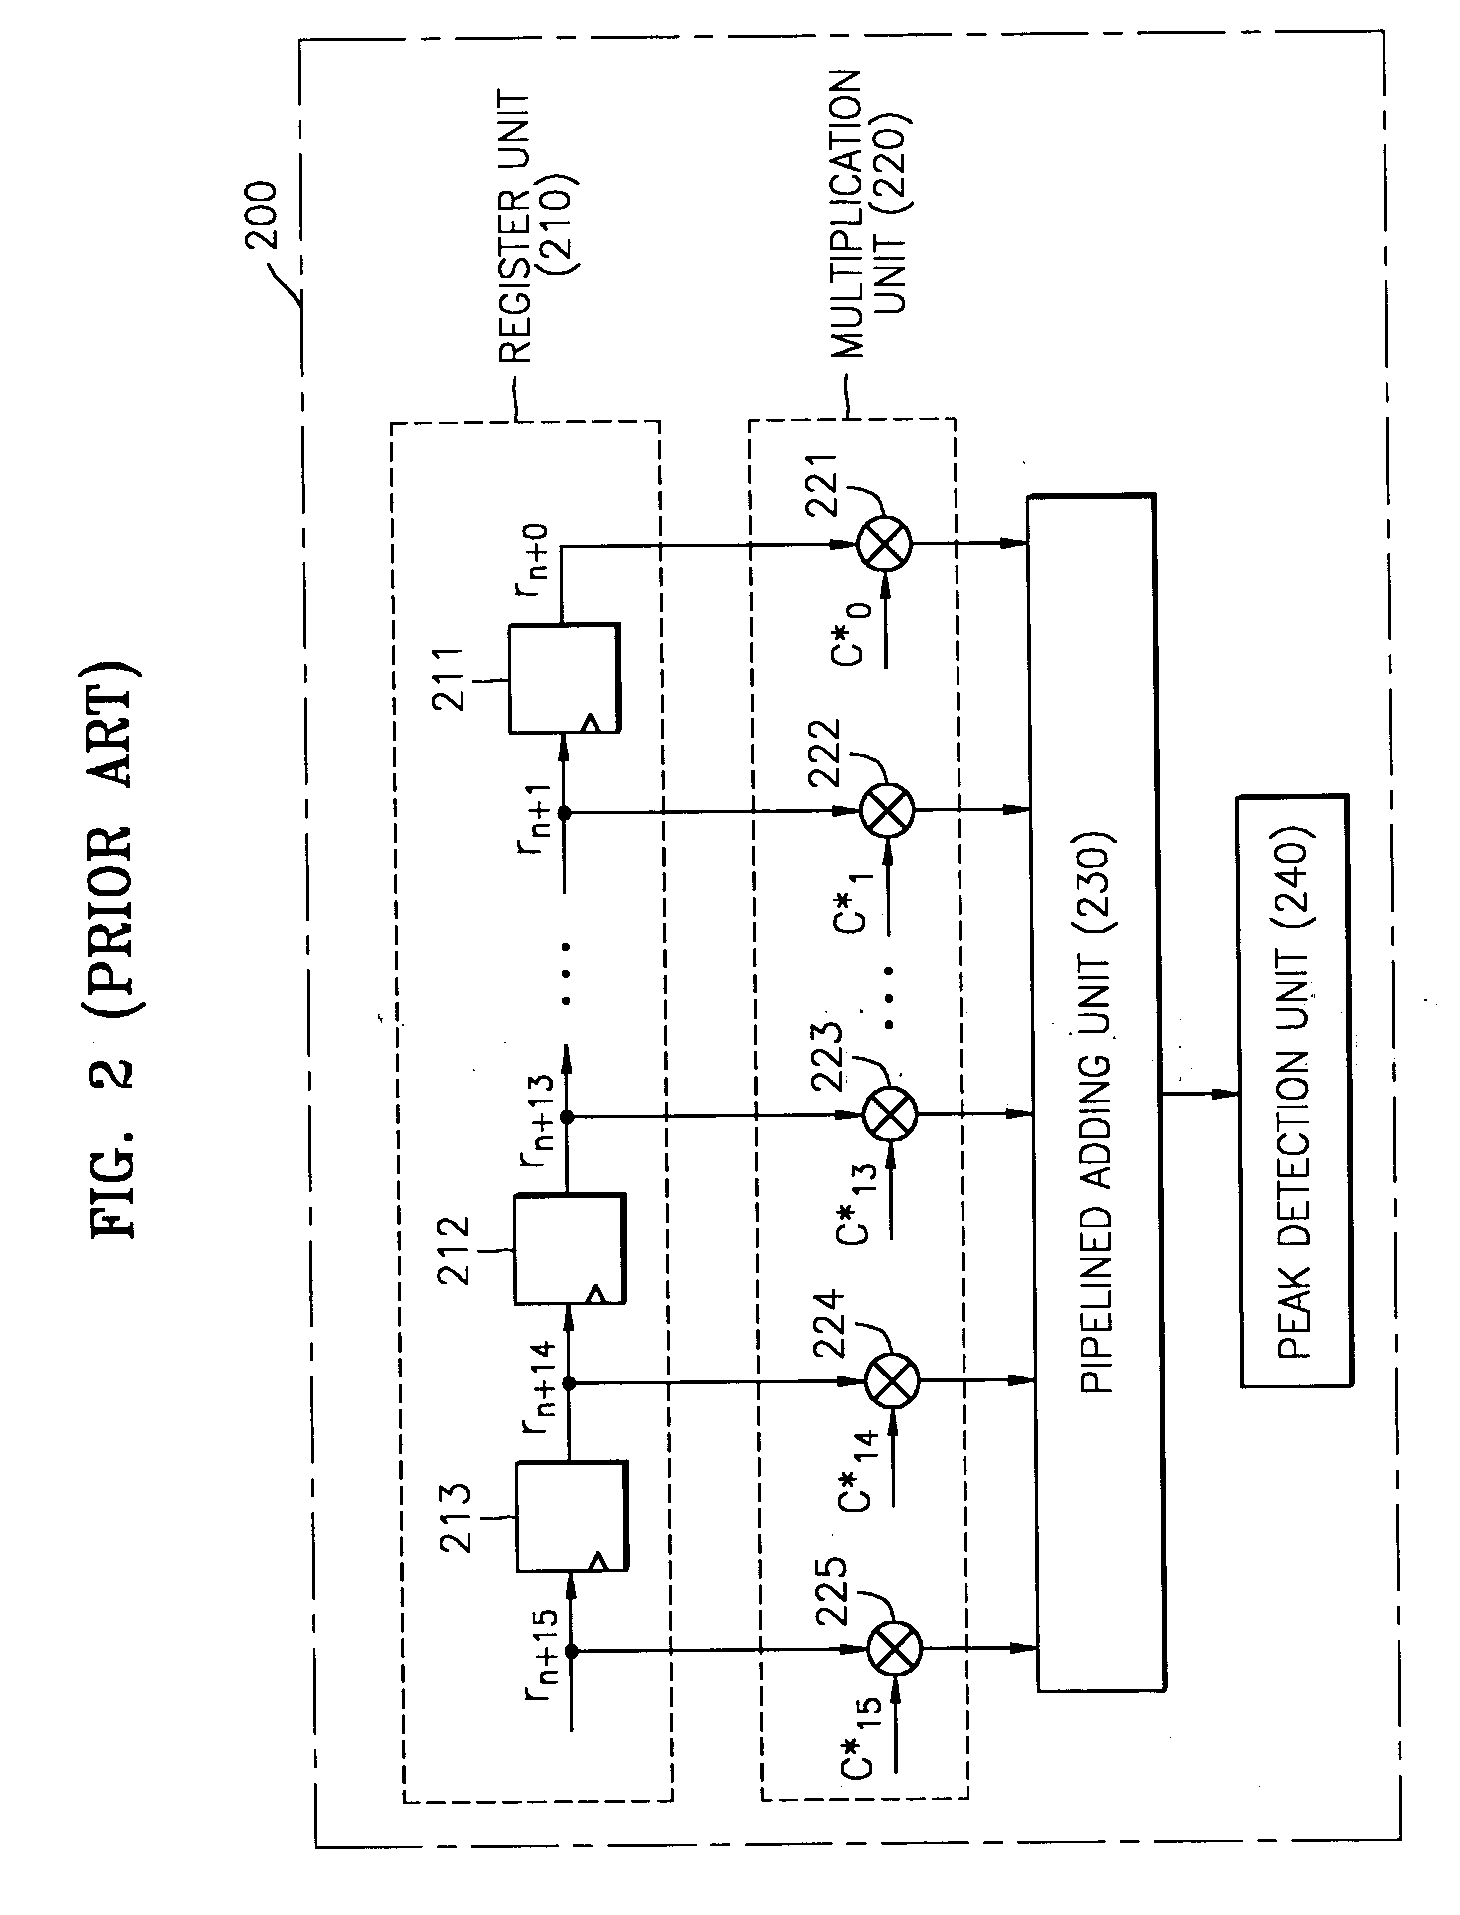 OFDM-based timing synchronization detection apparatus and method